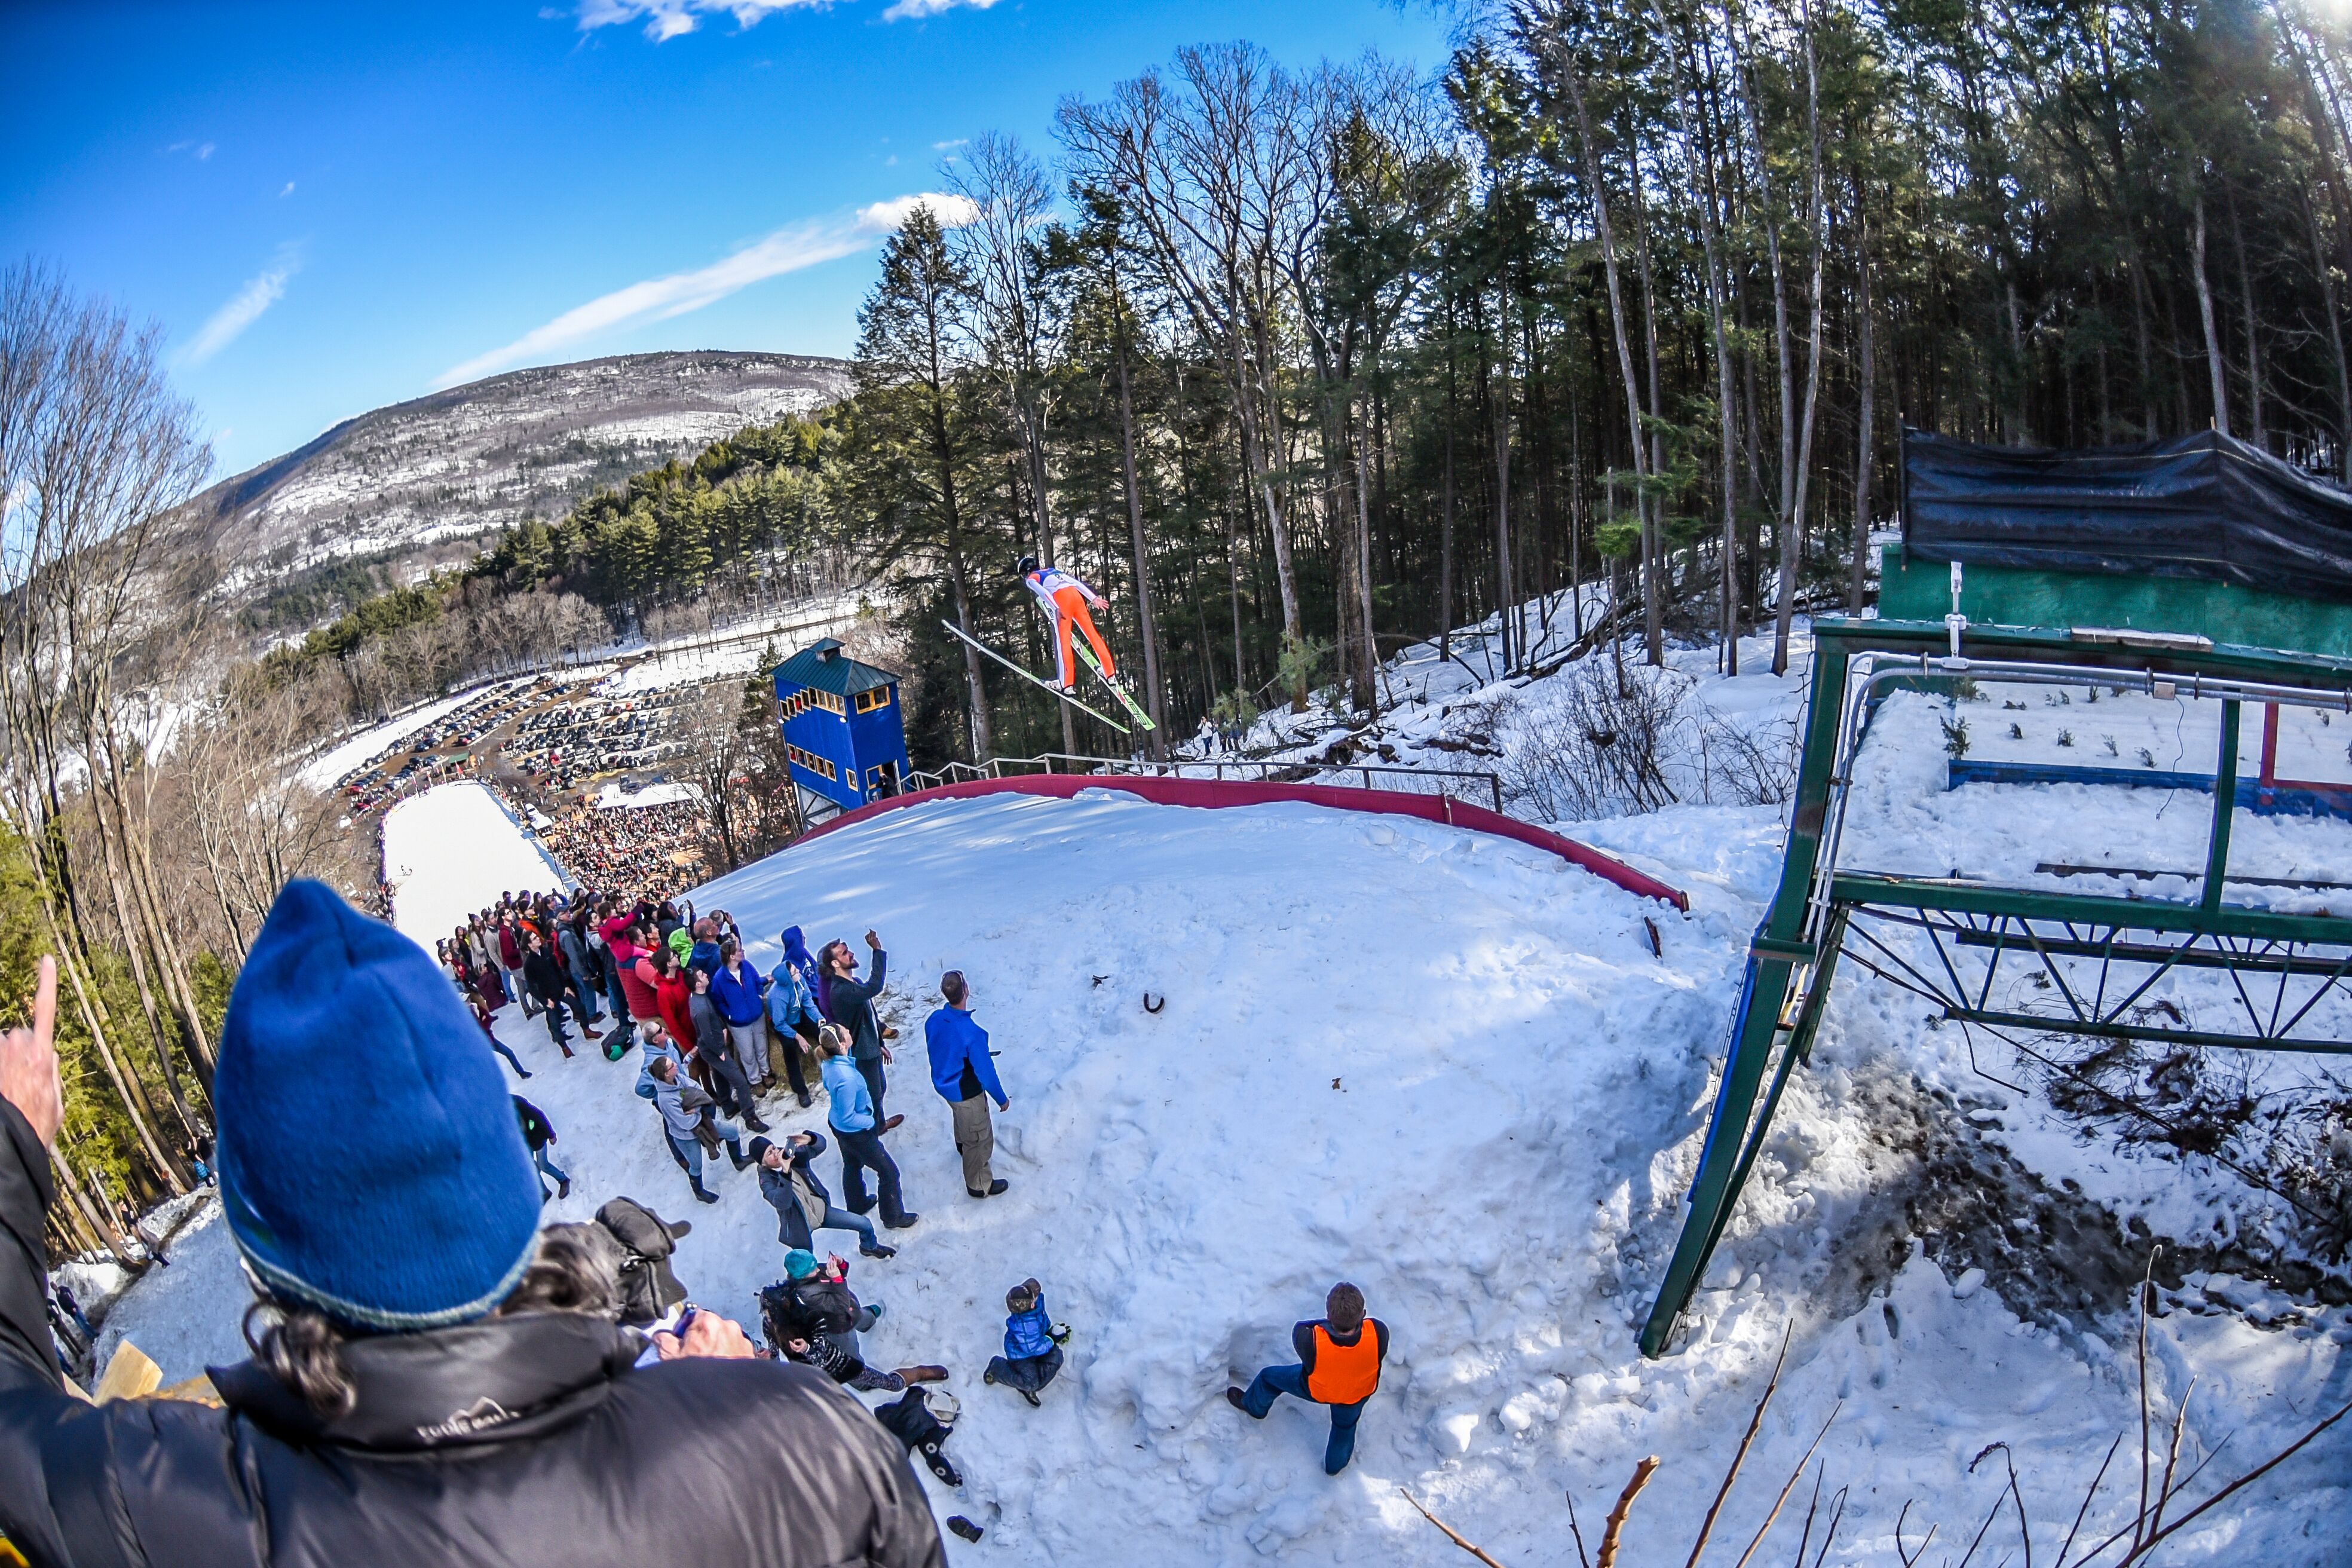 Ski jumping takes center stage in Vermont